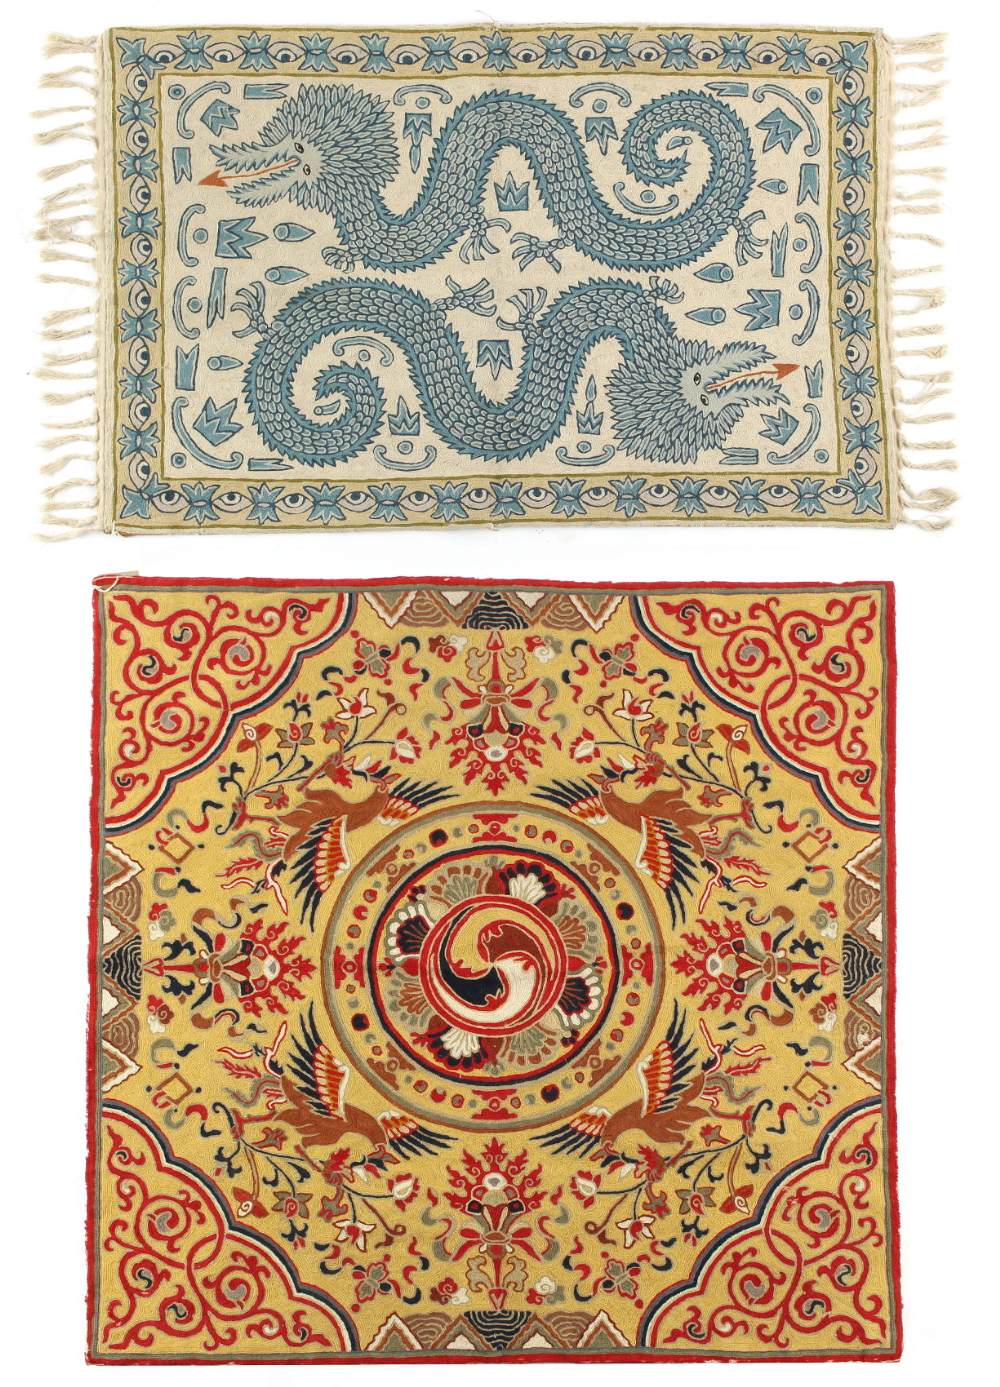 Two crewel work rugs in the Chinese taste, the larger with four phoenixes on a yellow ground, the